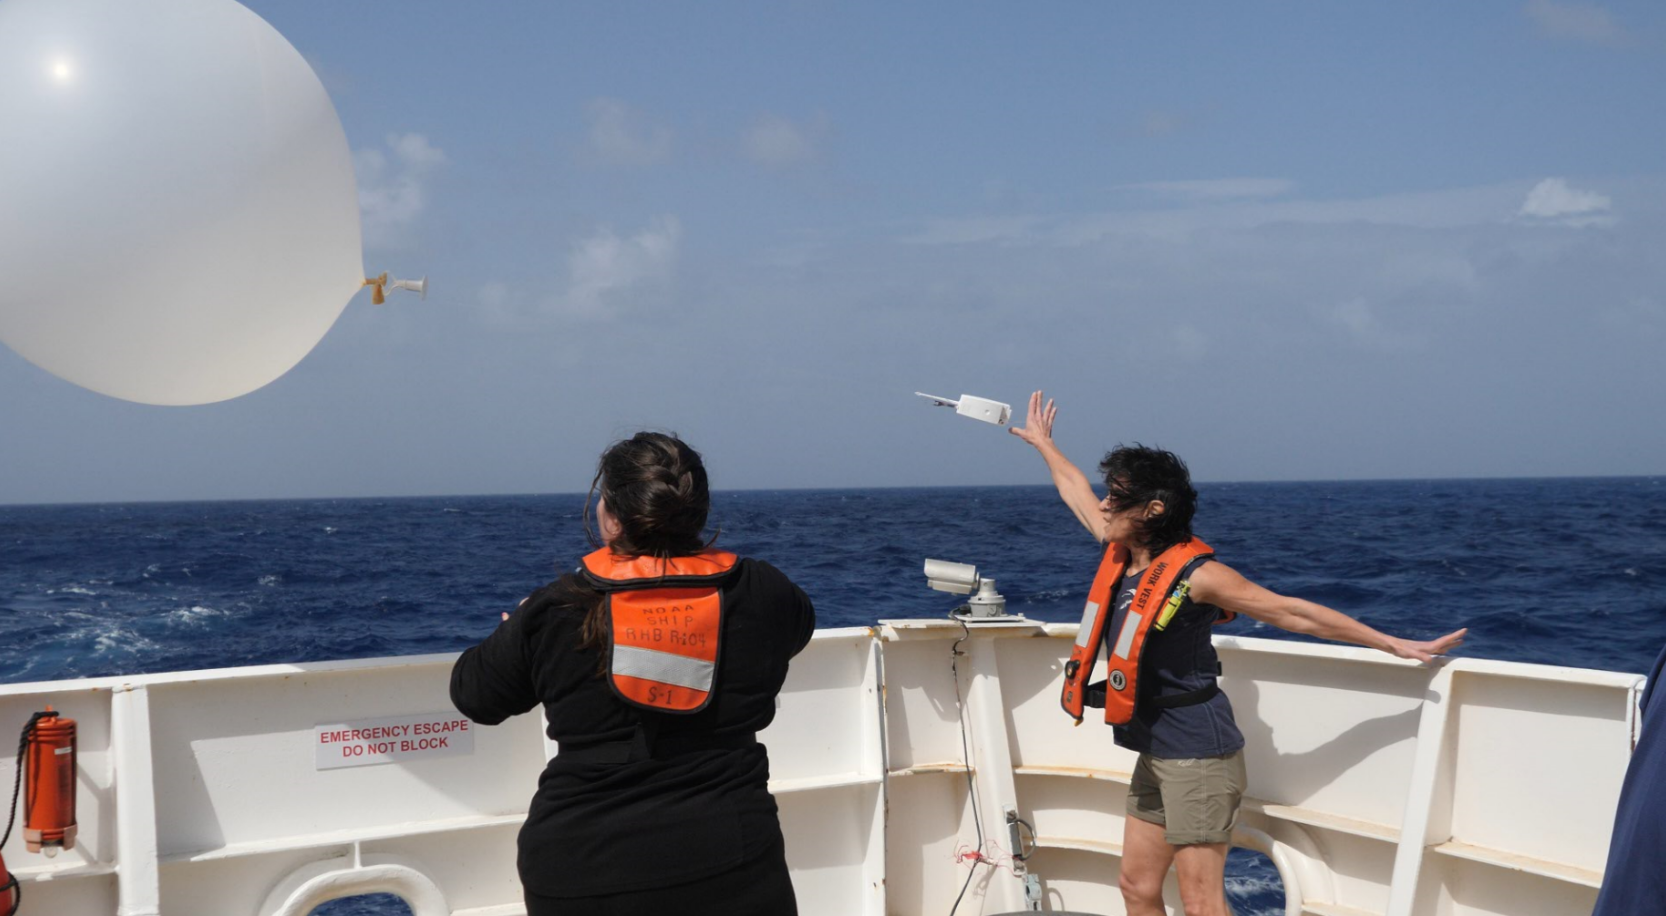 PSD's Janet Intrieri (right) launches a radiosonde from the back of the ship.